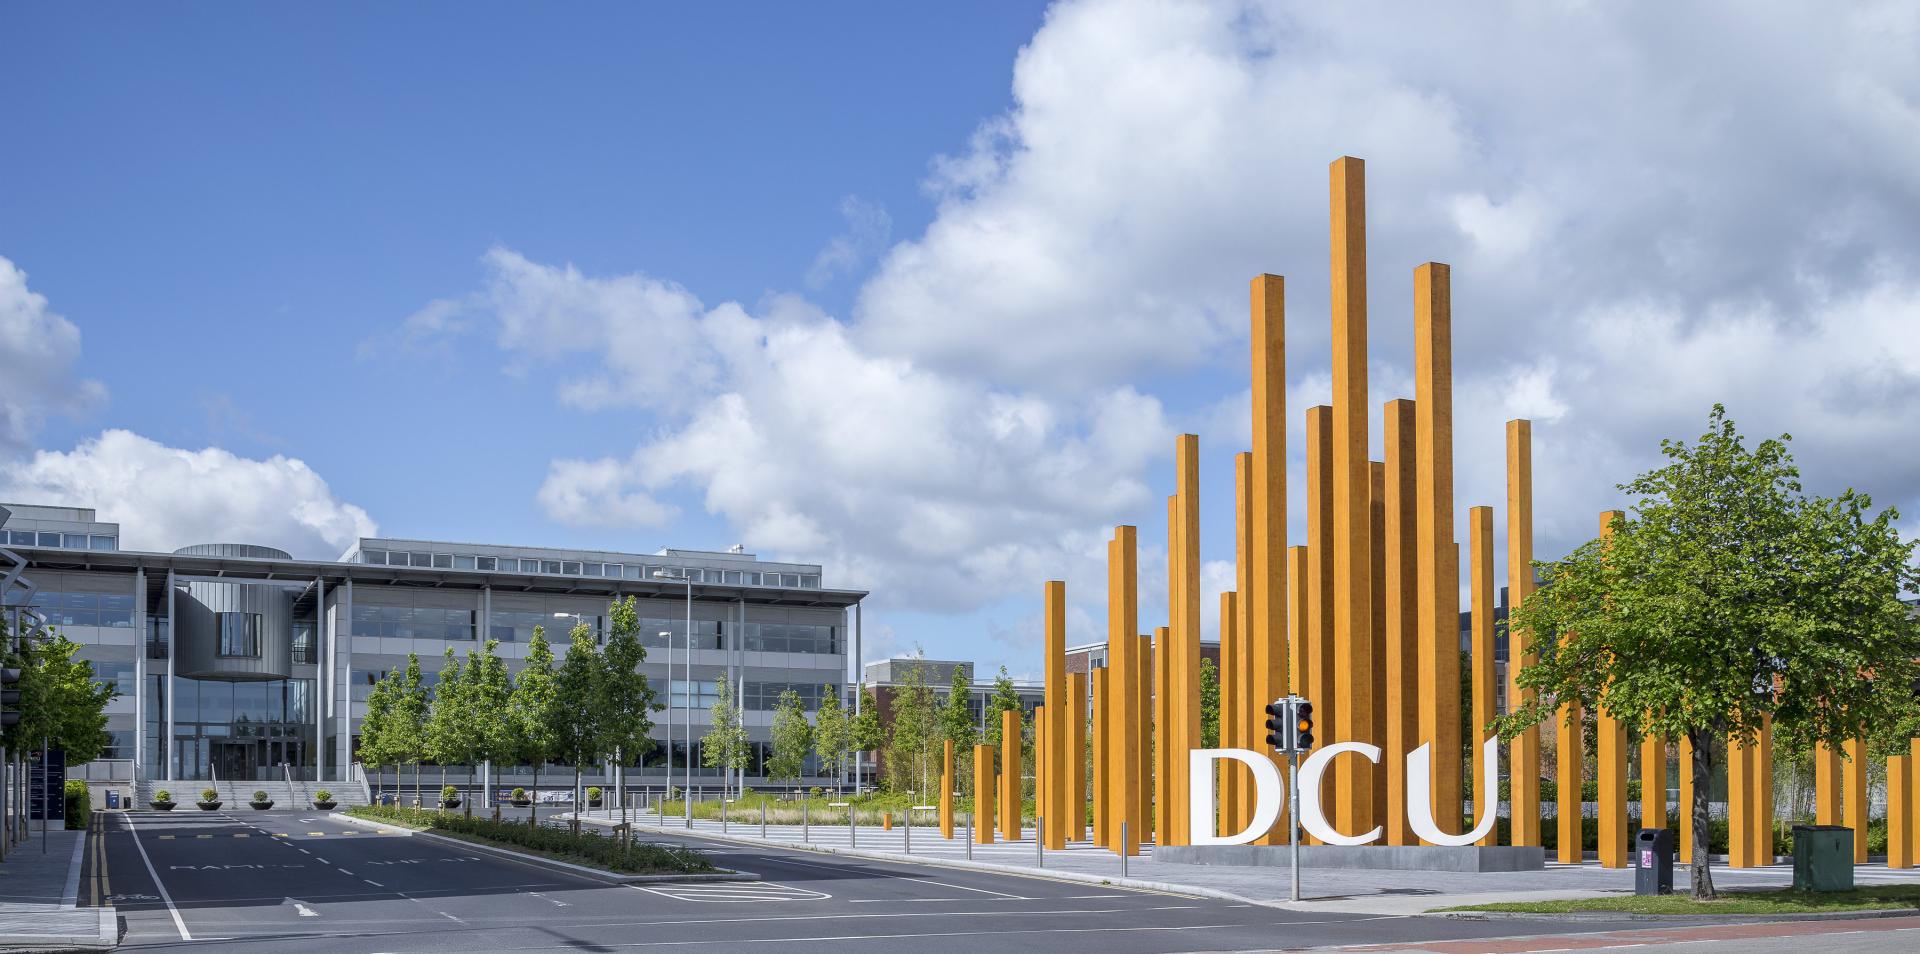 DCU COVID-19 Student Emergency Fund launched in response to challenges and financial hardship facing students